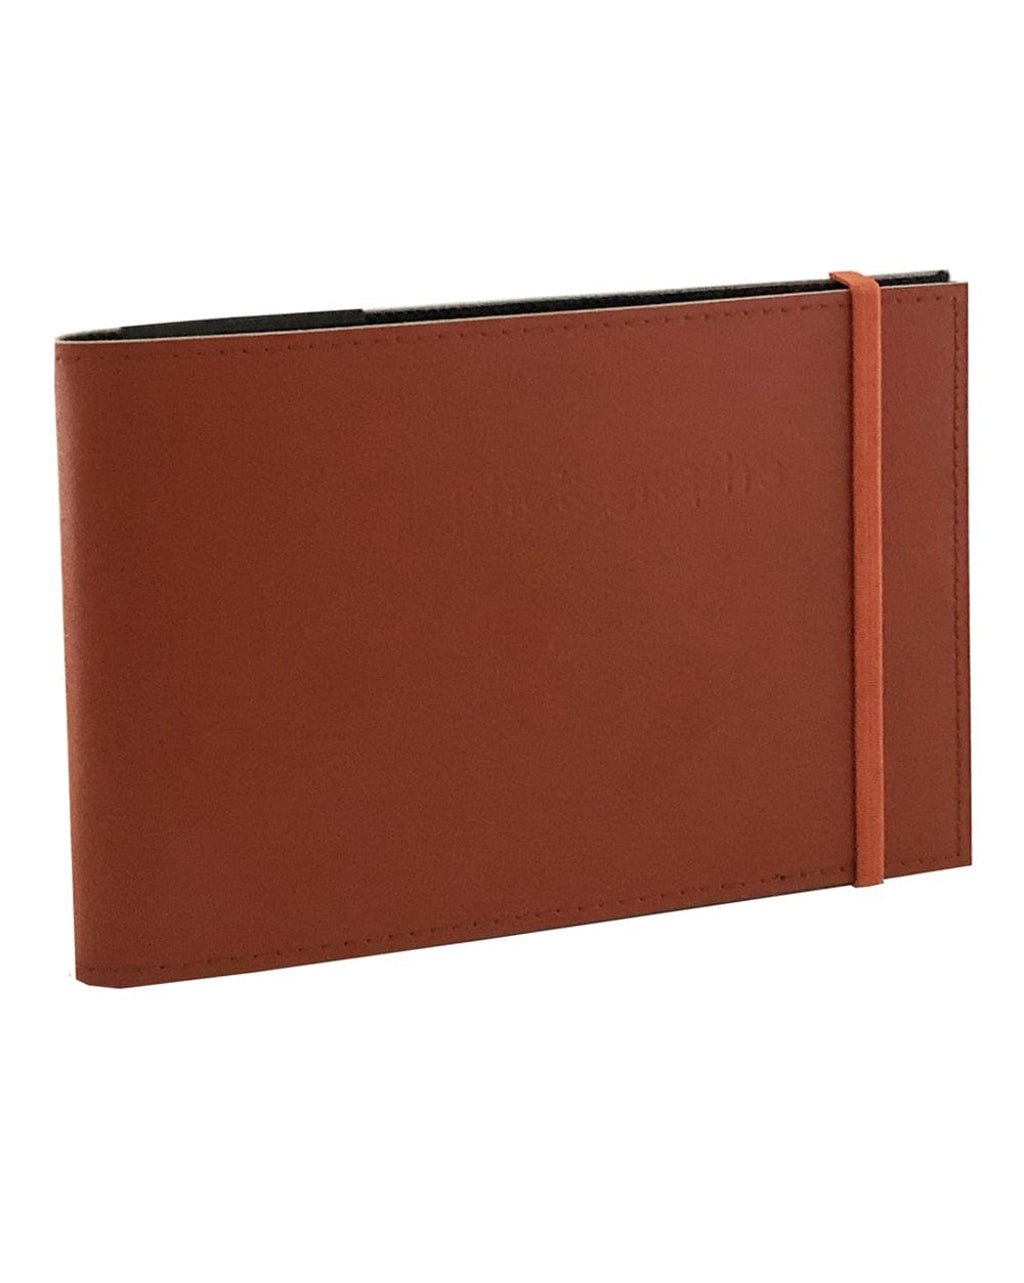 Citi Leather Cinnamon Stick Slip-in Bragbook Photo Album from our Photo Albums collection by Profile Products Australia